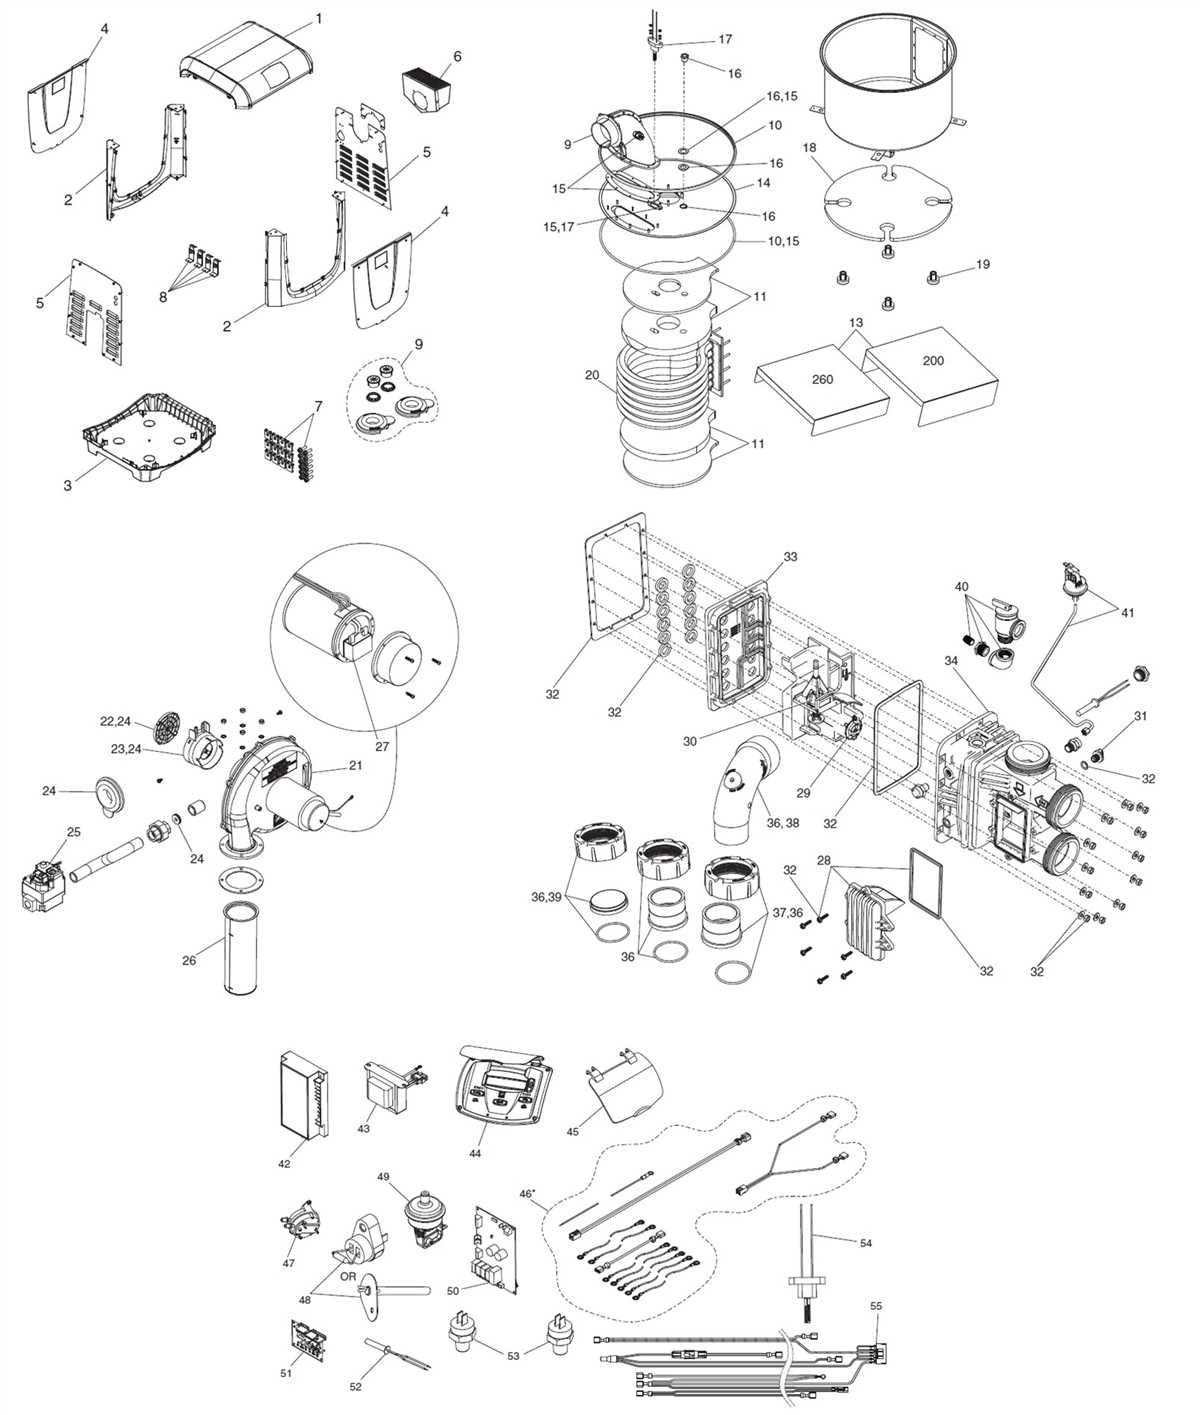 Using the Parts Diagram for Troubleshooting and Maintenance